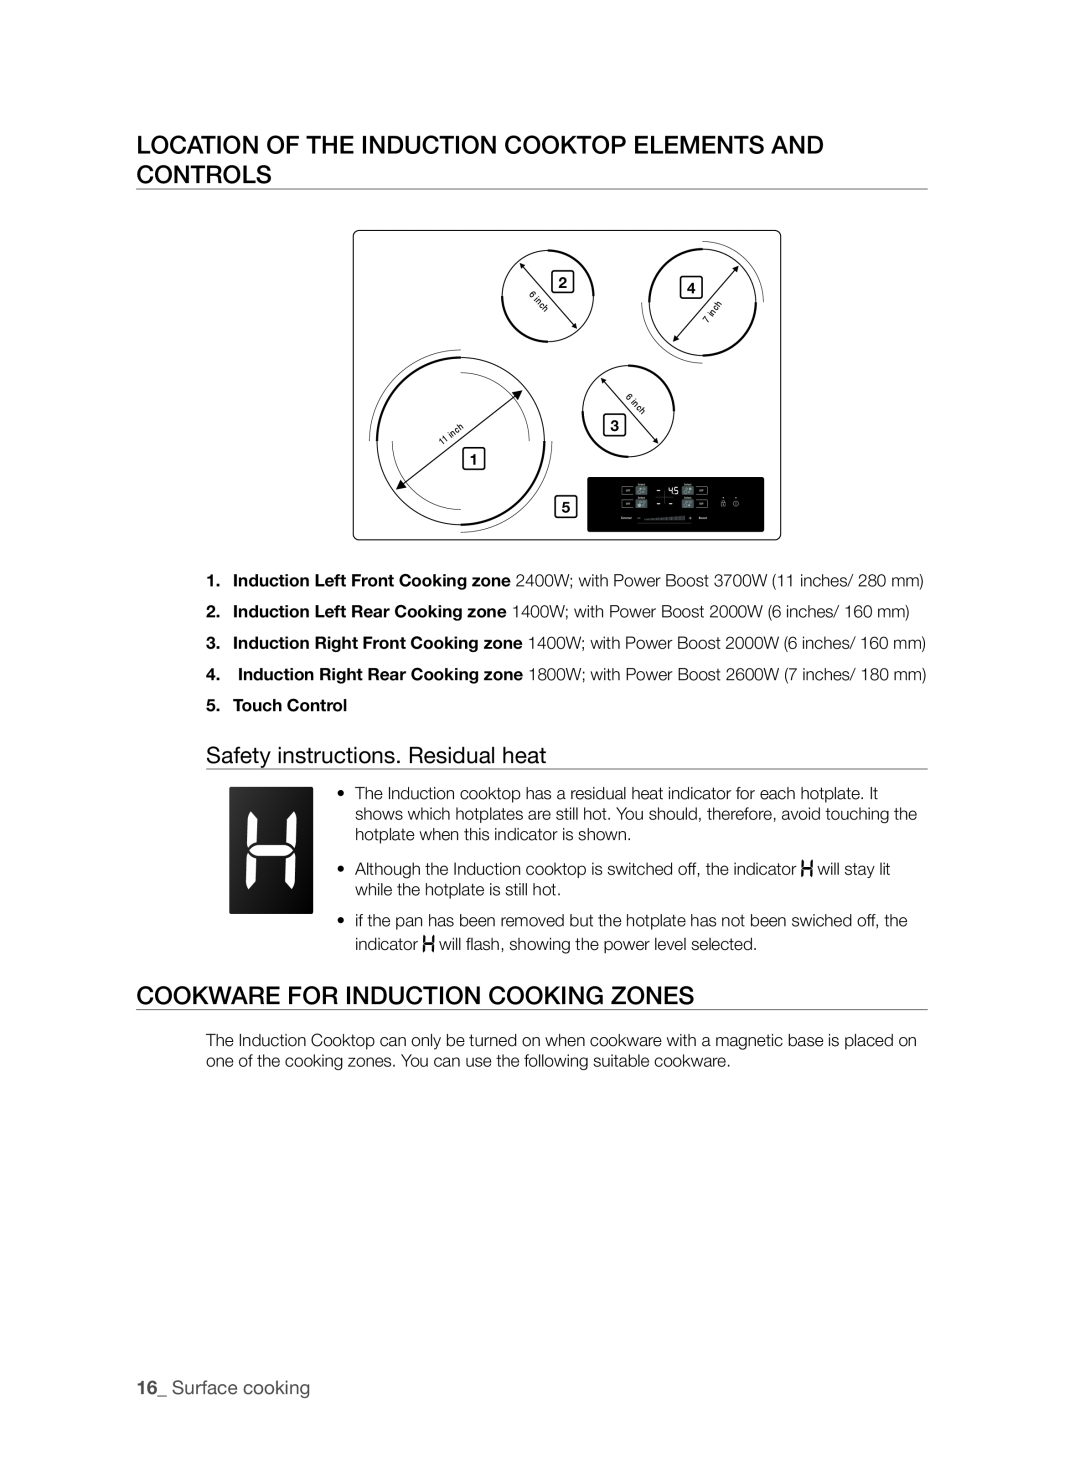 Samsung FTQ307NWGX Location of the Induction Cooktop elements and controls, Cookware for induction cooking zones 